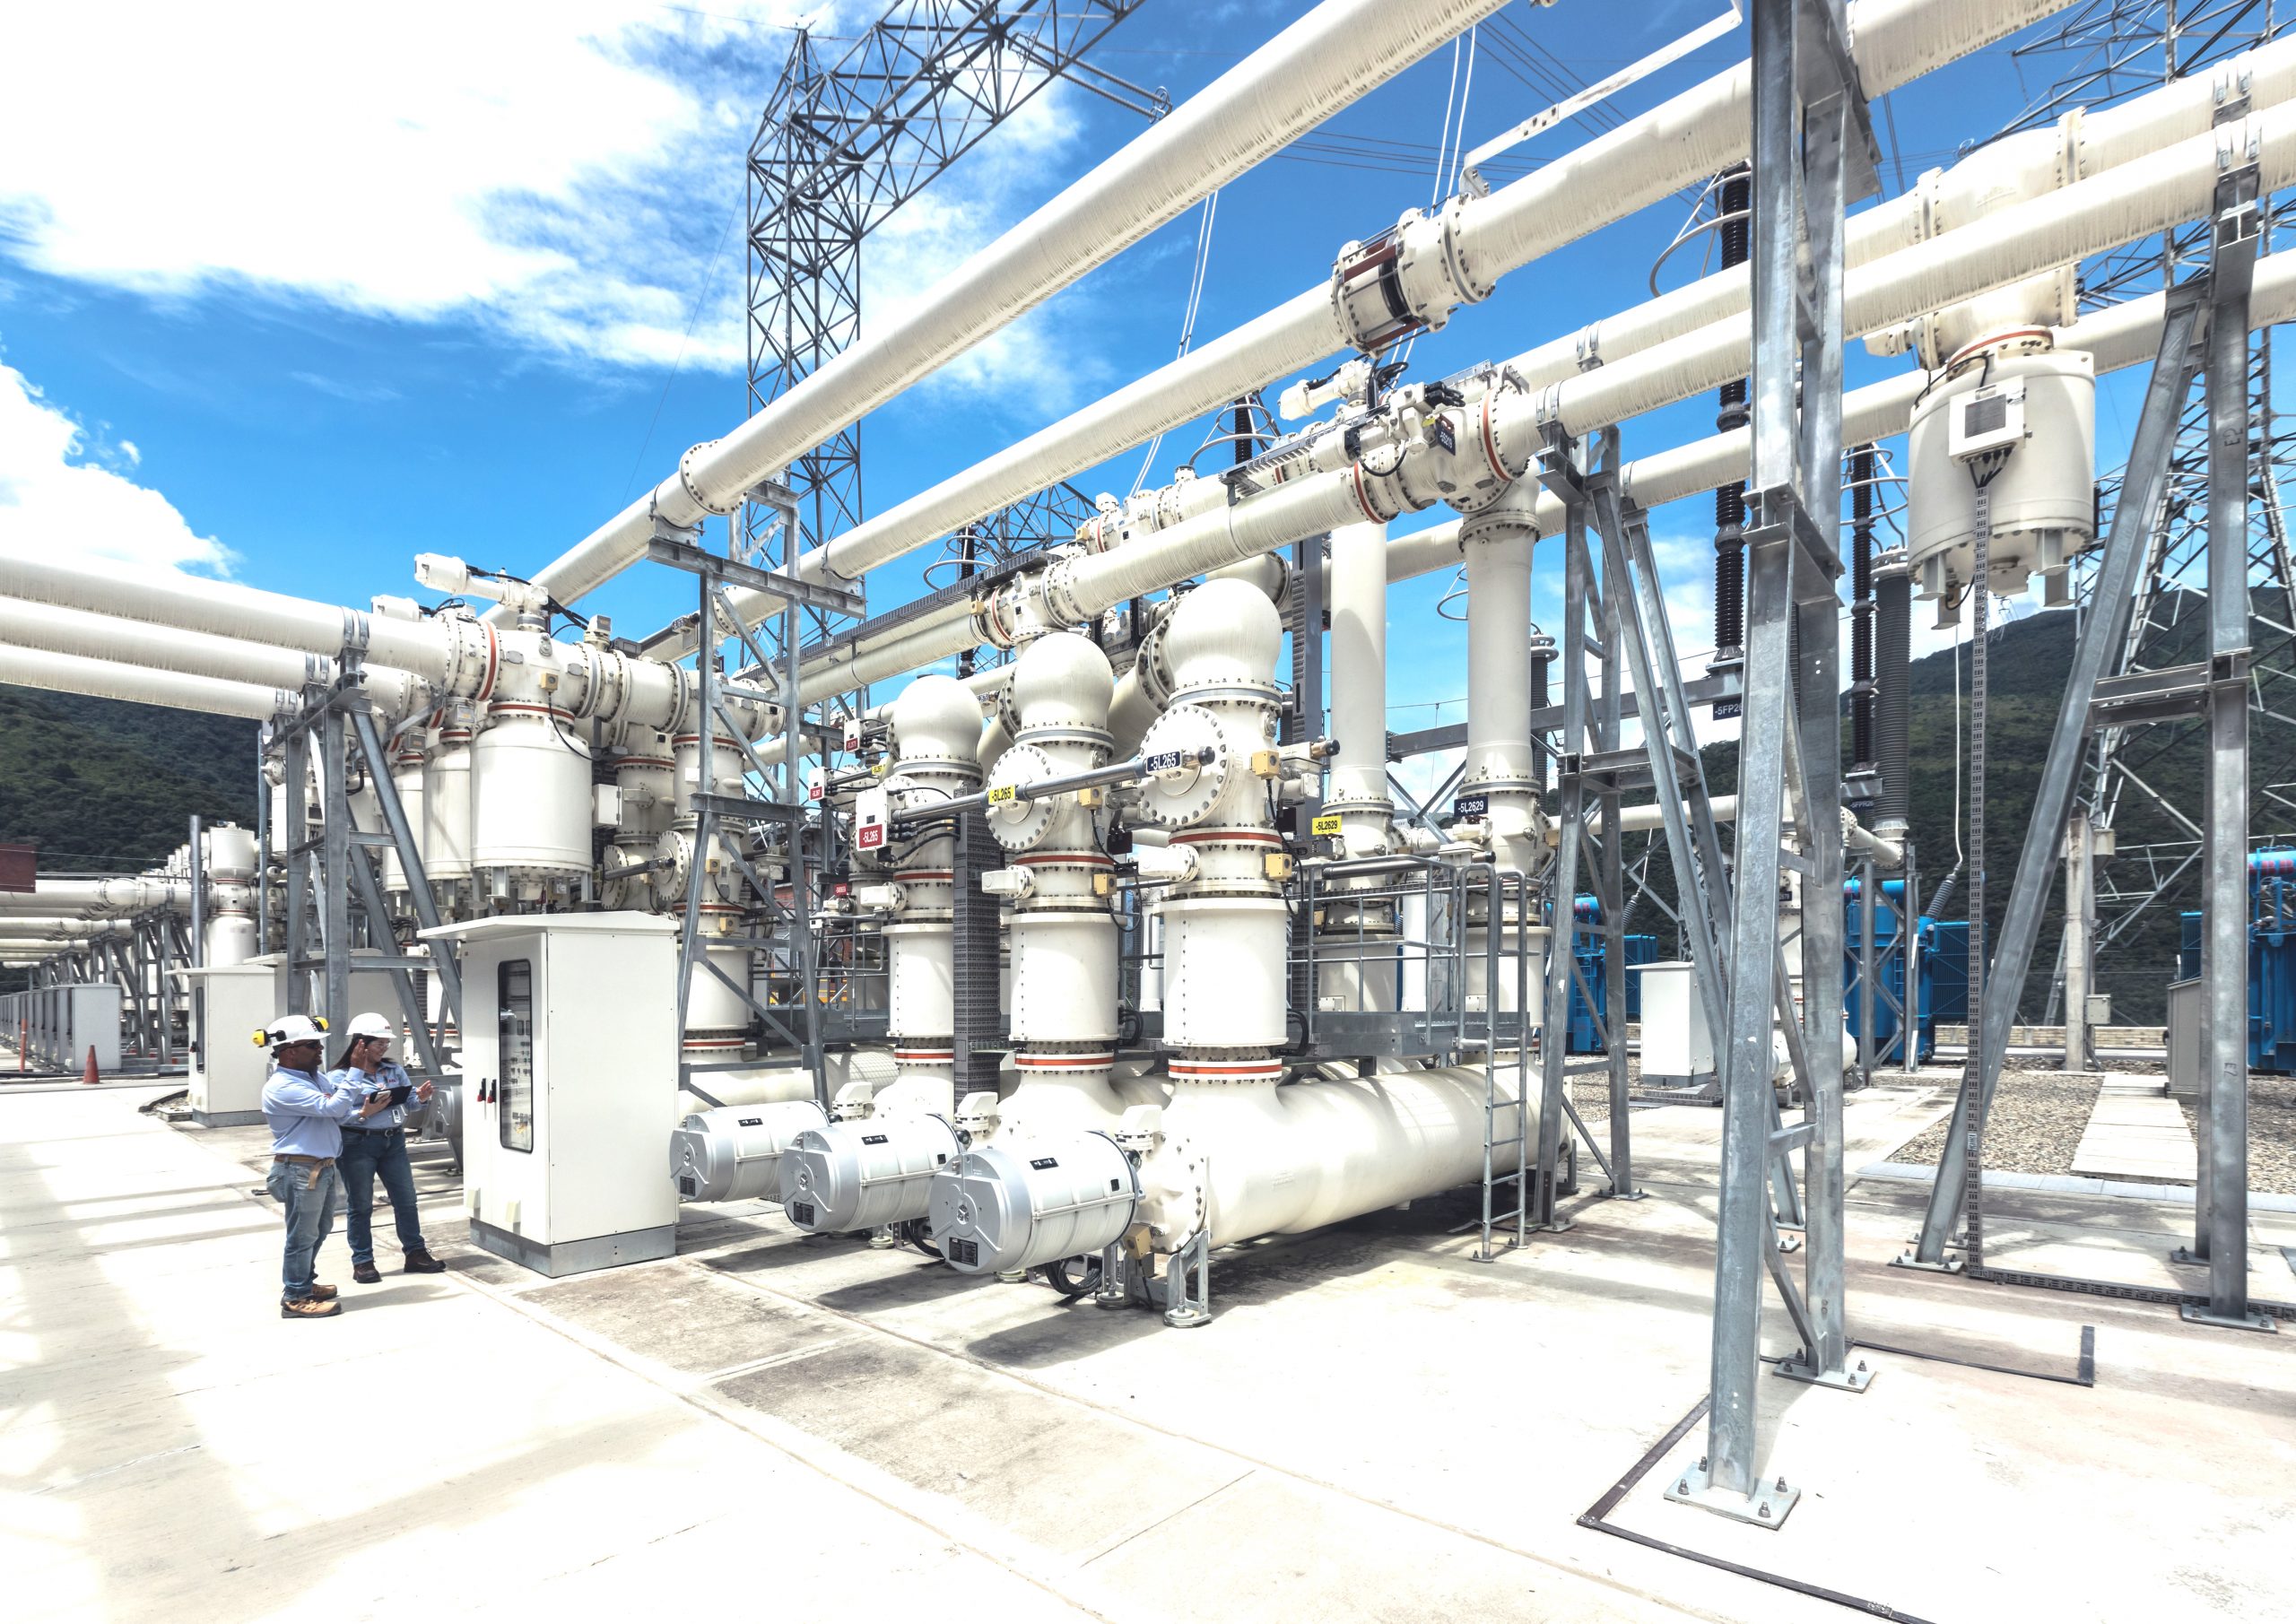 Similar type of Gas Insulated Substation (GIS)